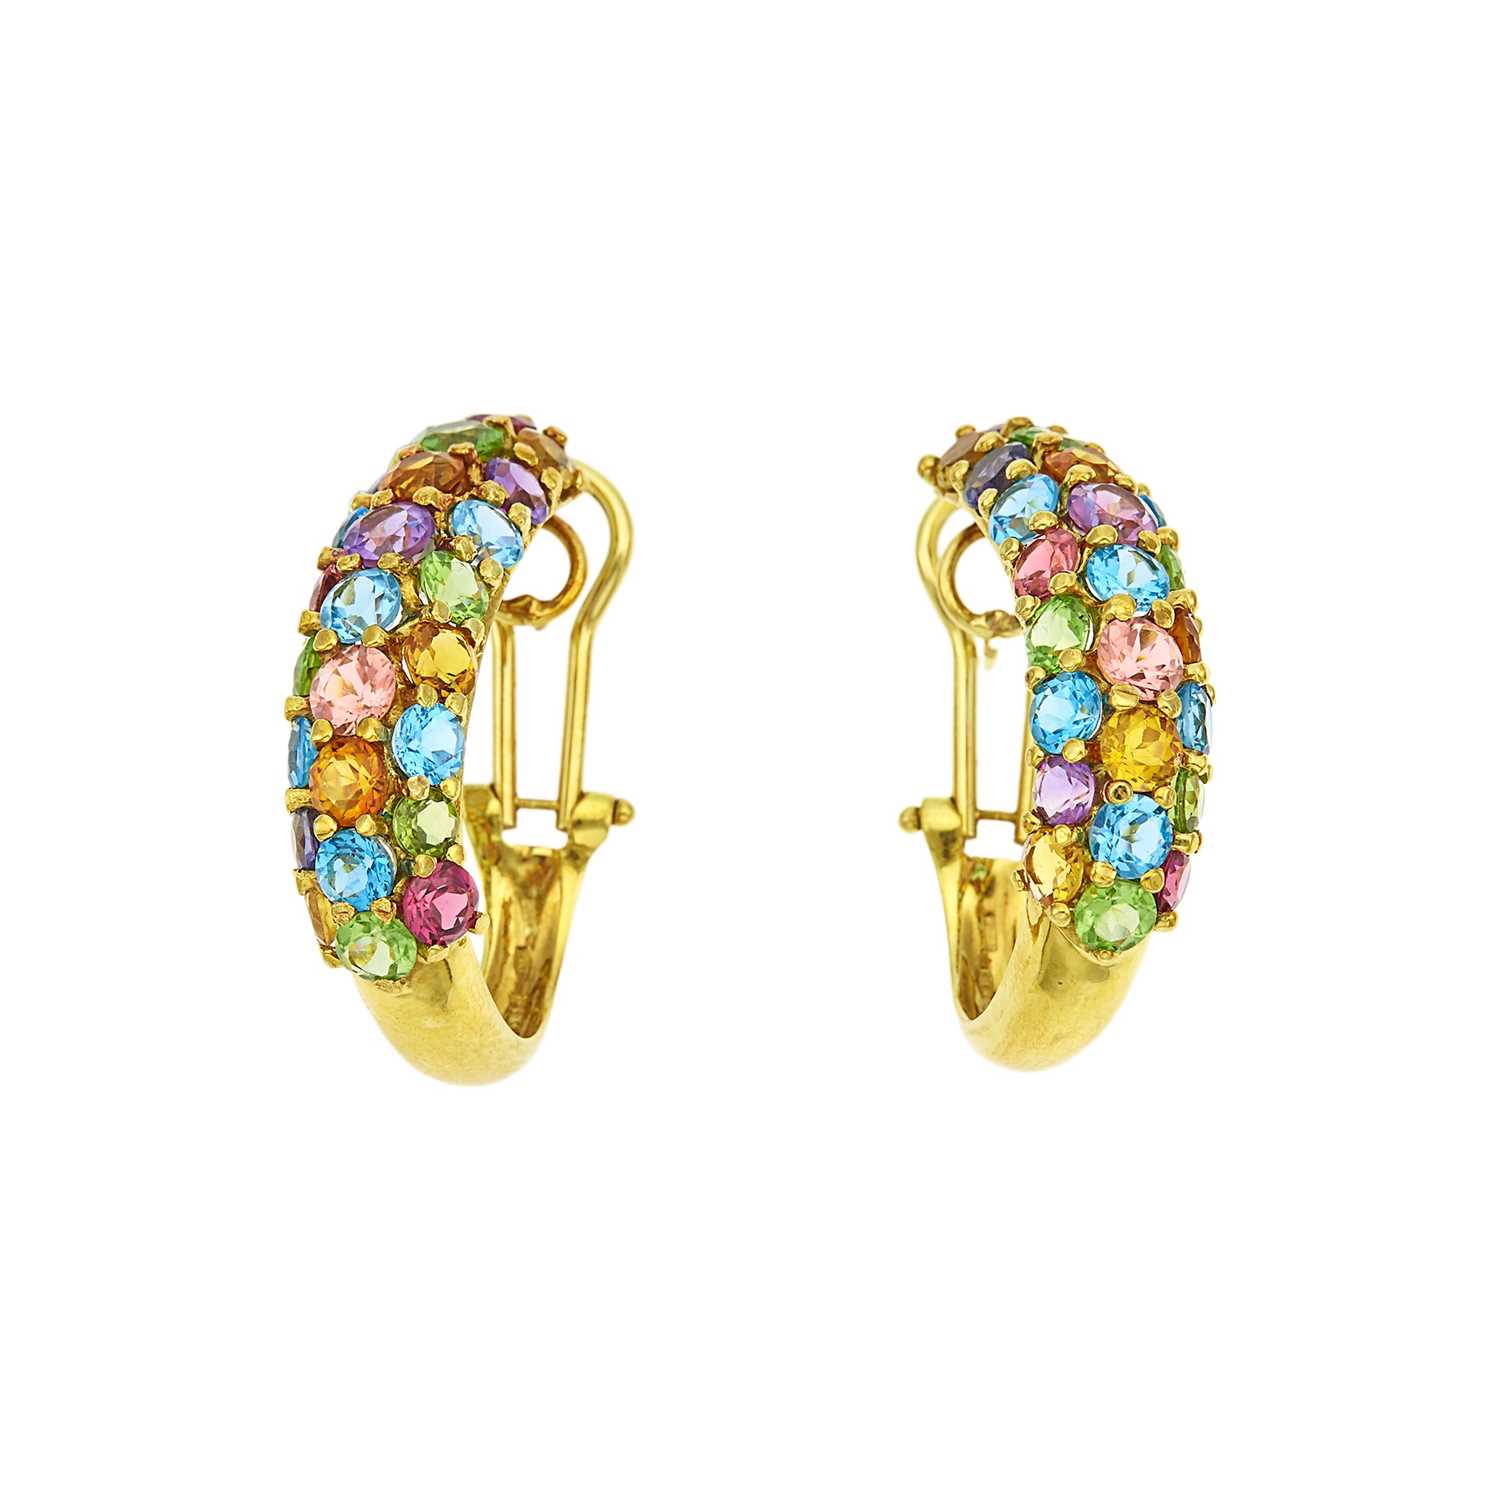 Lot 1218 - Pair of Gold and Multicolored Stone Hoop Earrings